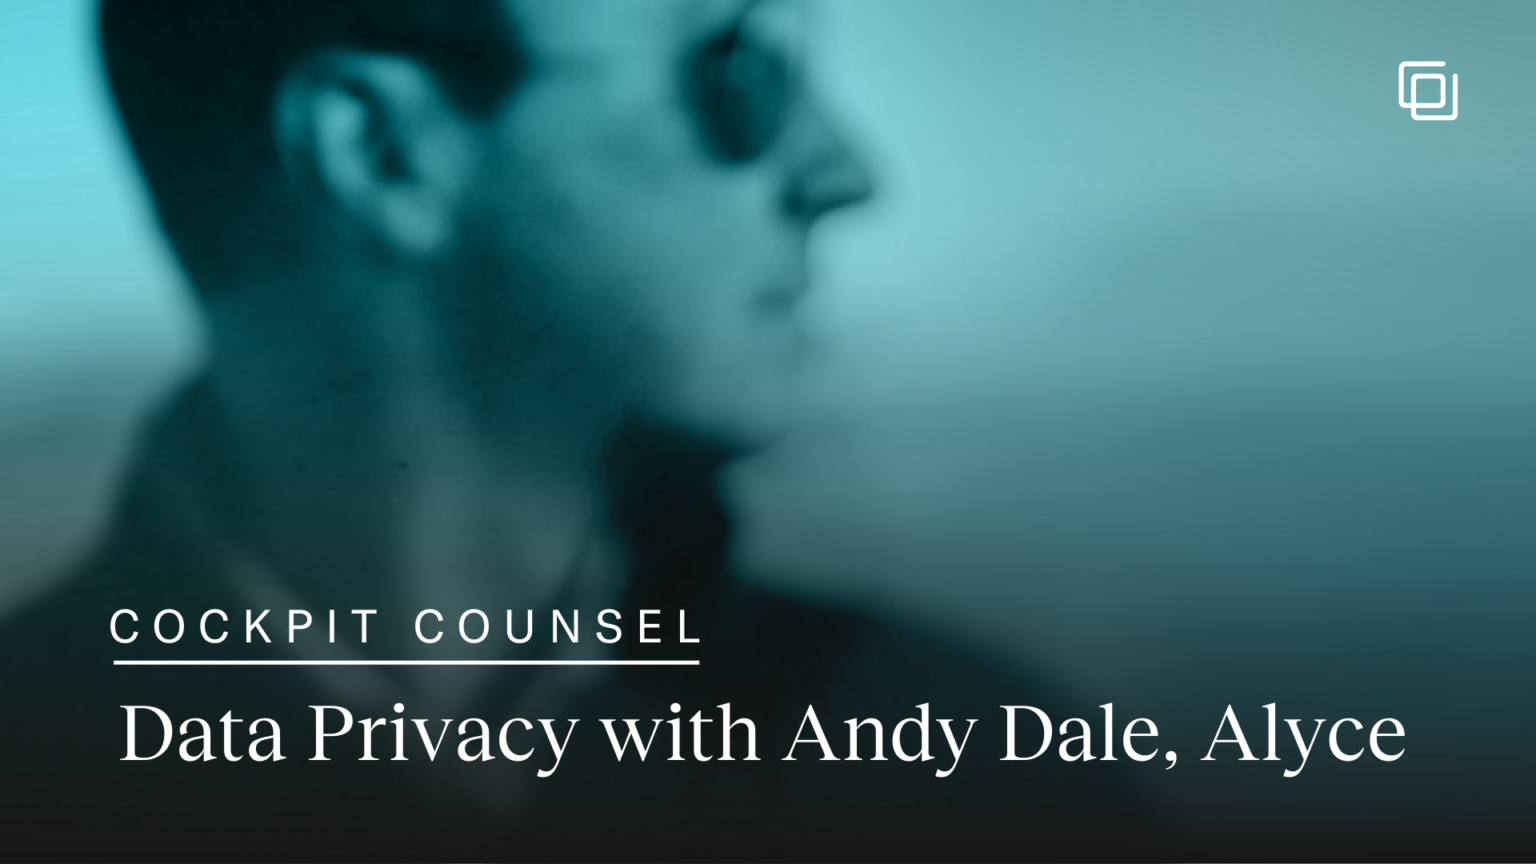 Cockpit Counsel: Data Privacy with Andy Dale, Alyce